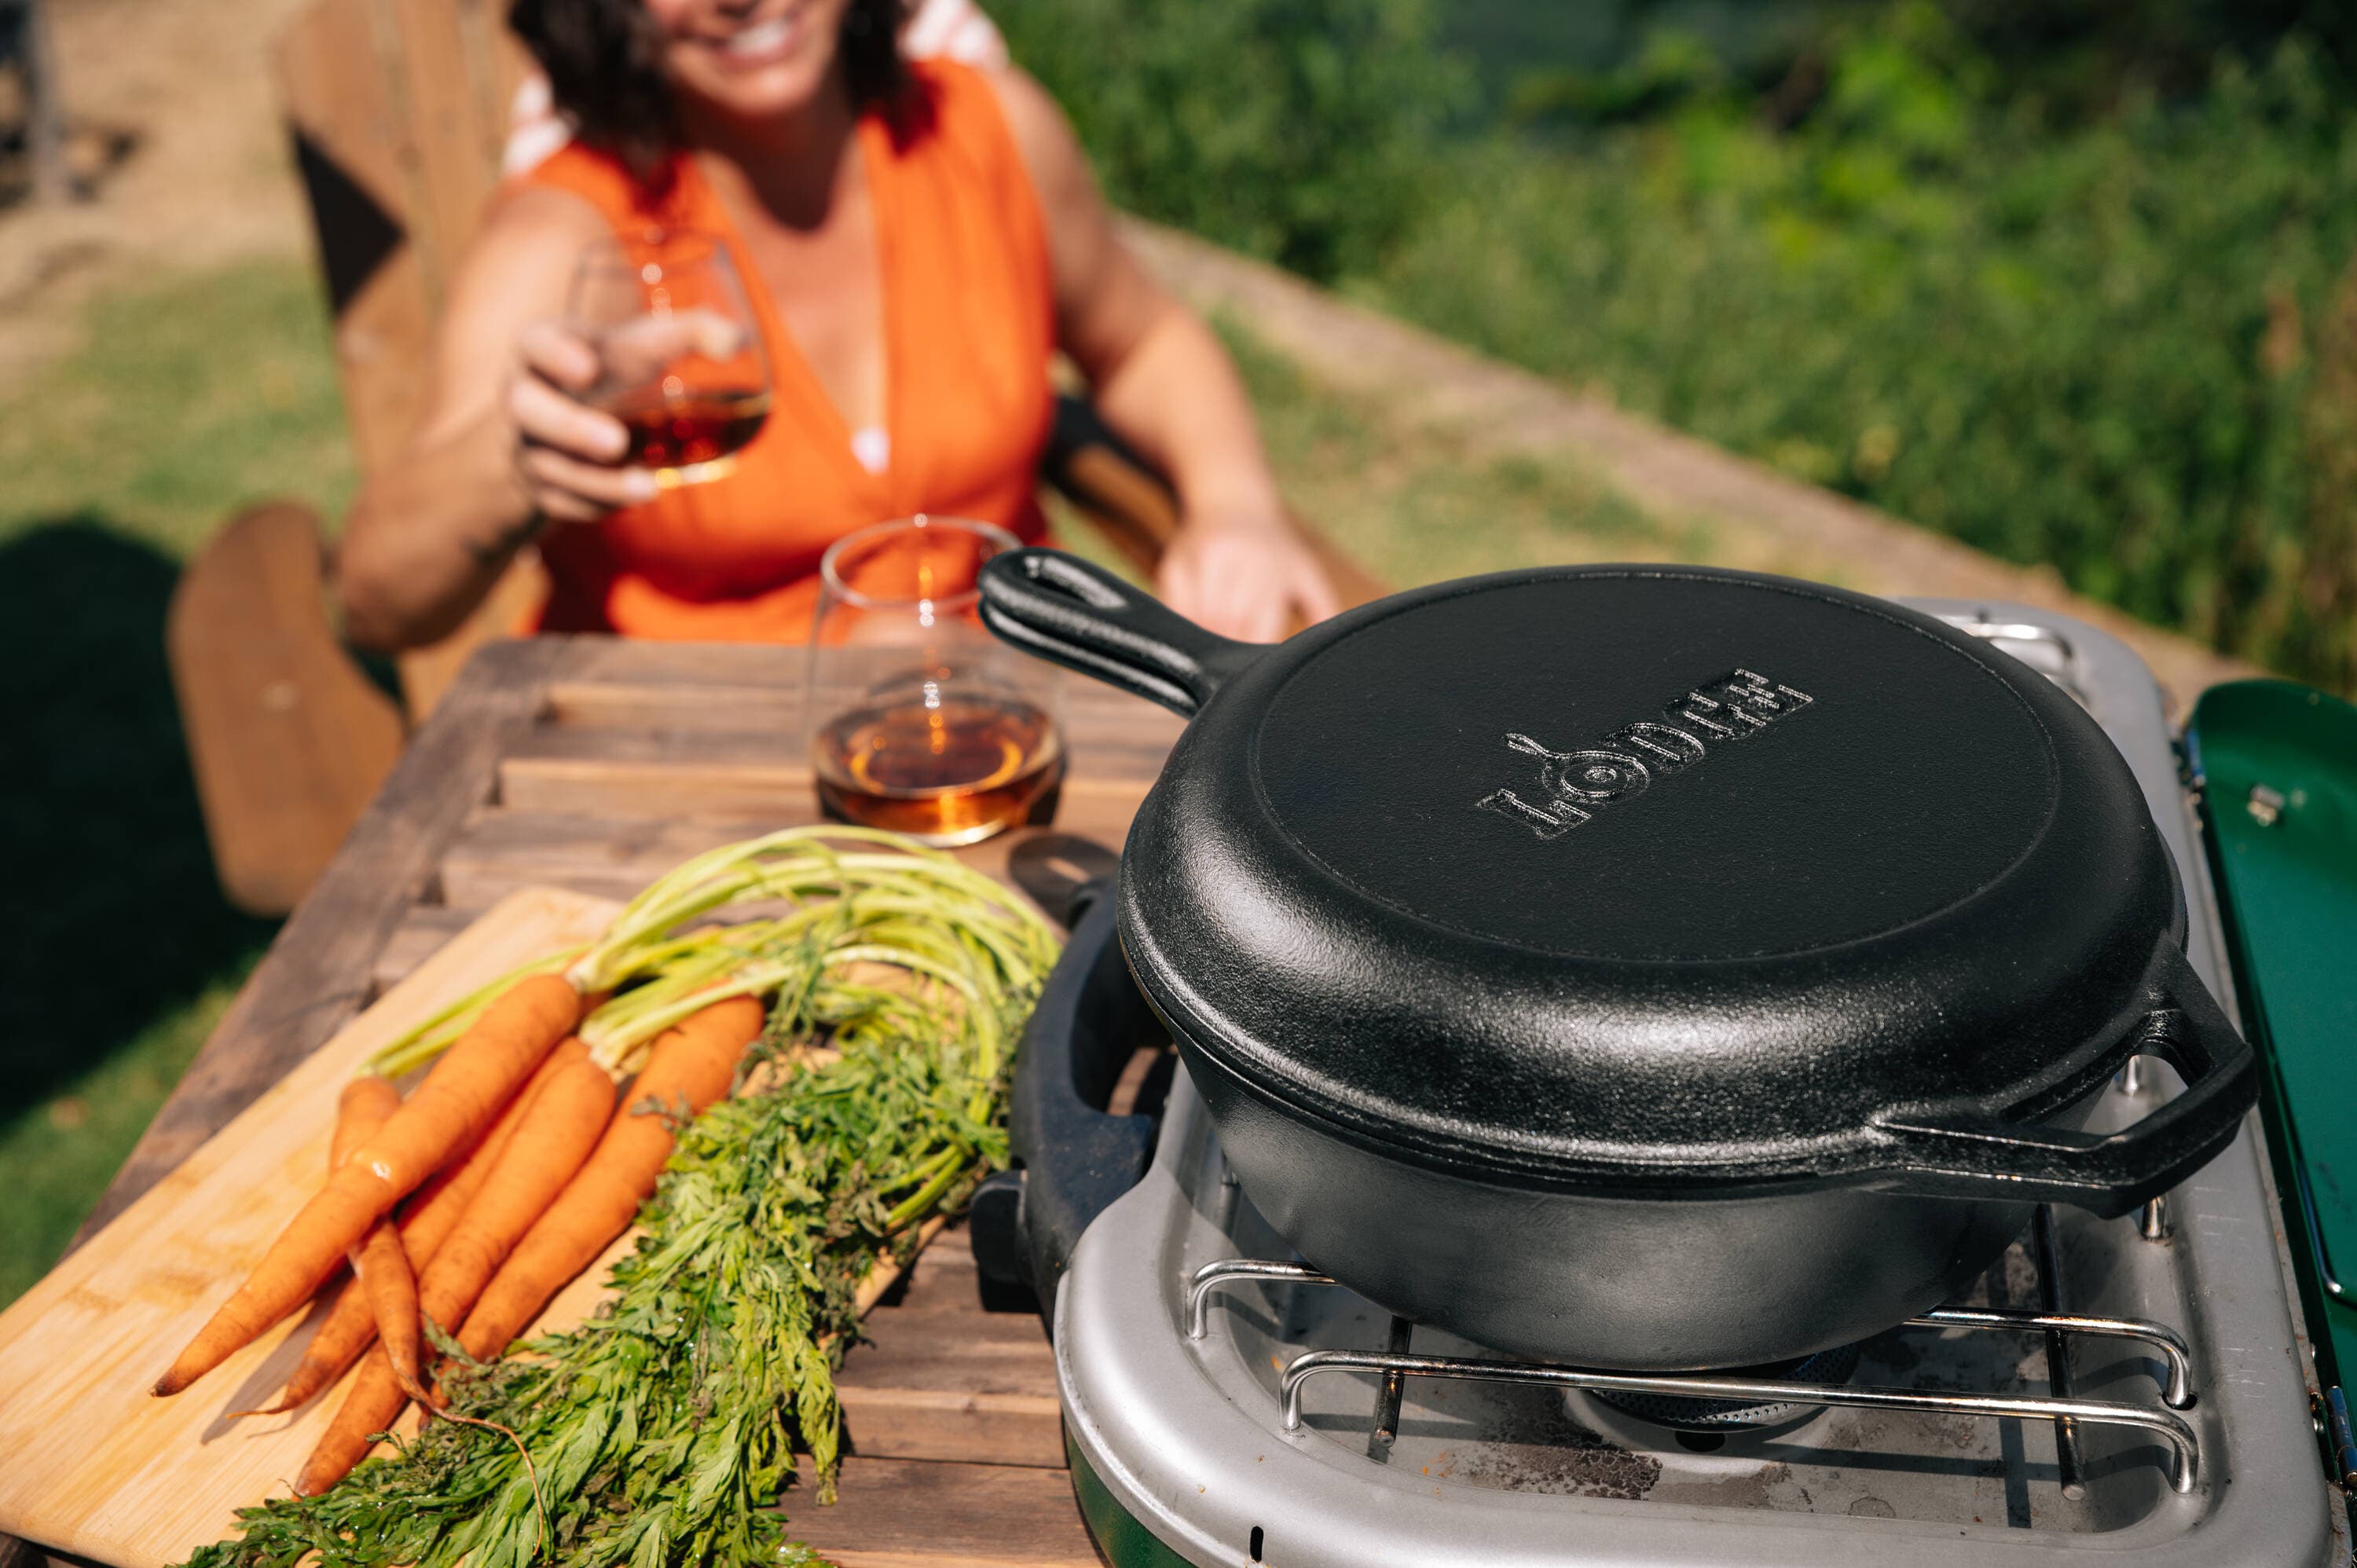 Save Big on This Lodge Cast-Iron Cooking Combo Set on  Now